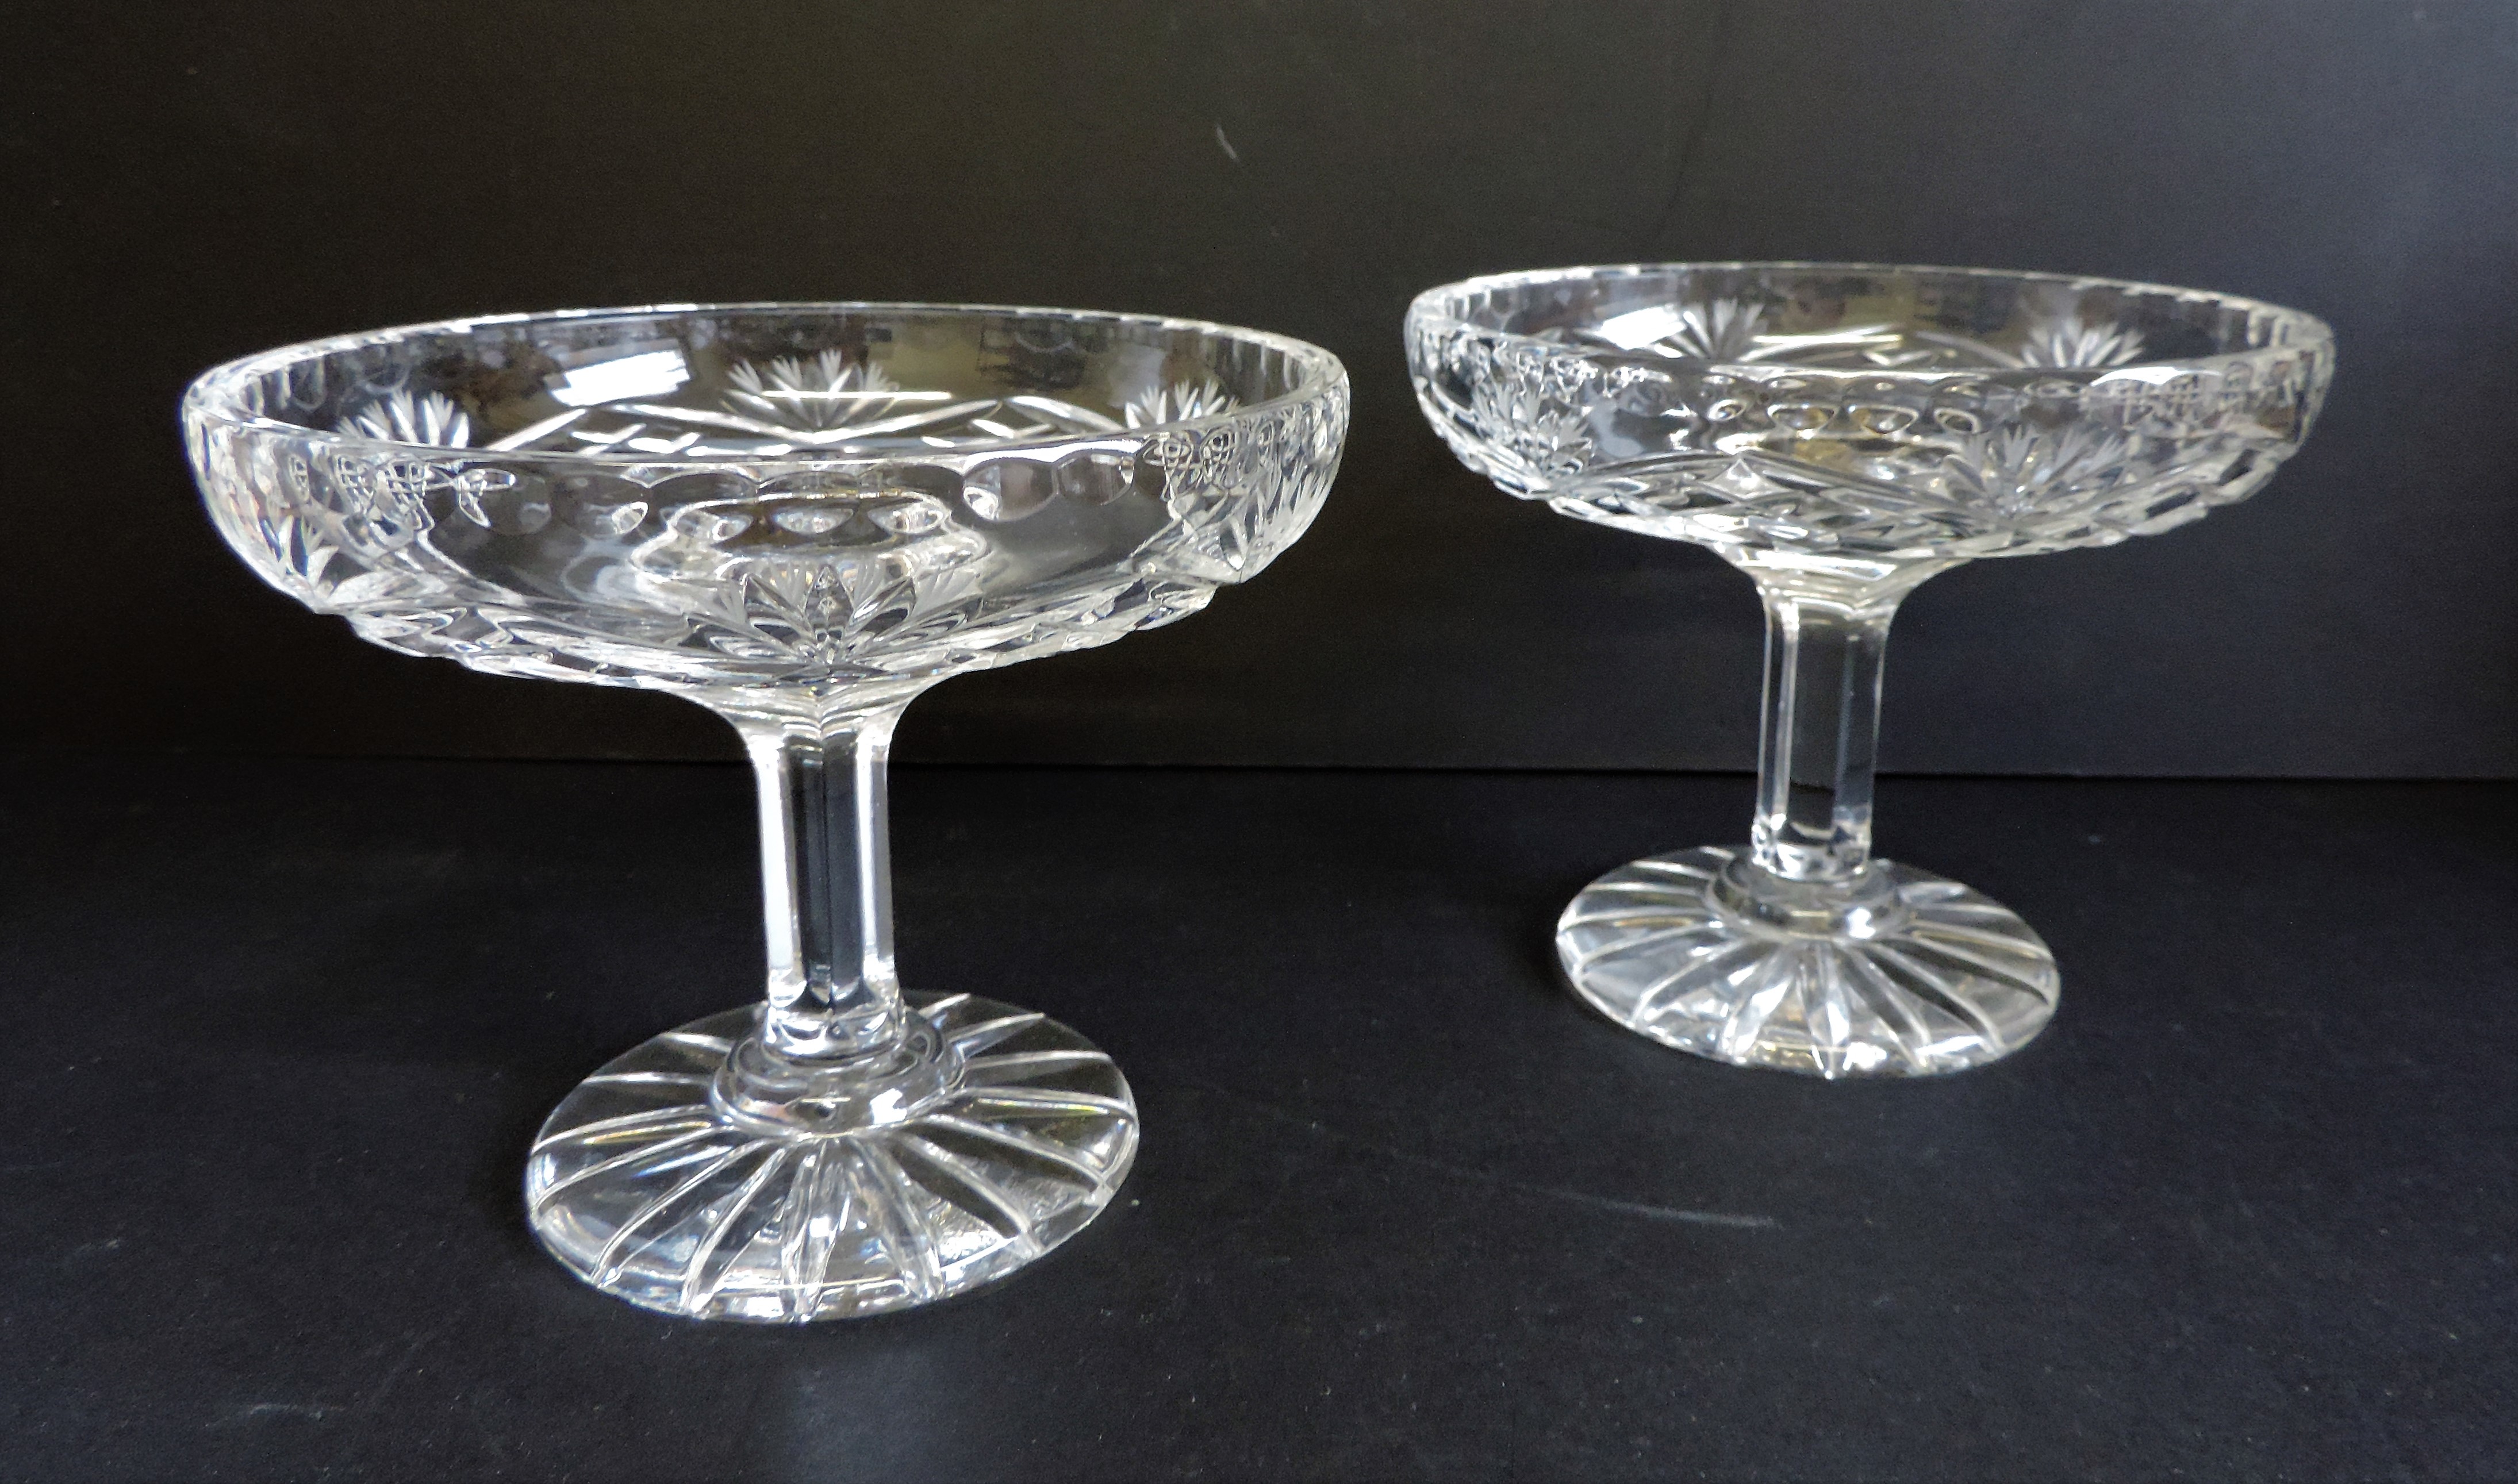 Pair of Hand Cut Crystal Dishes by Zawercie of Poland